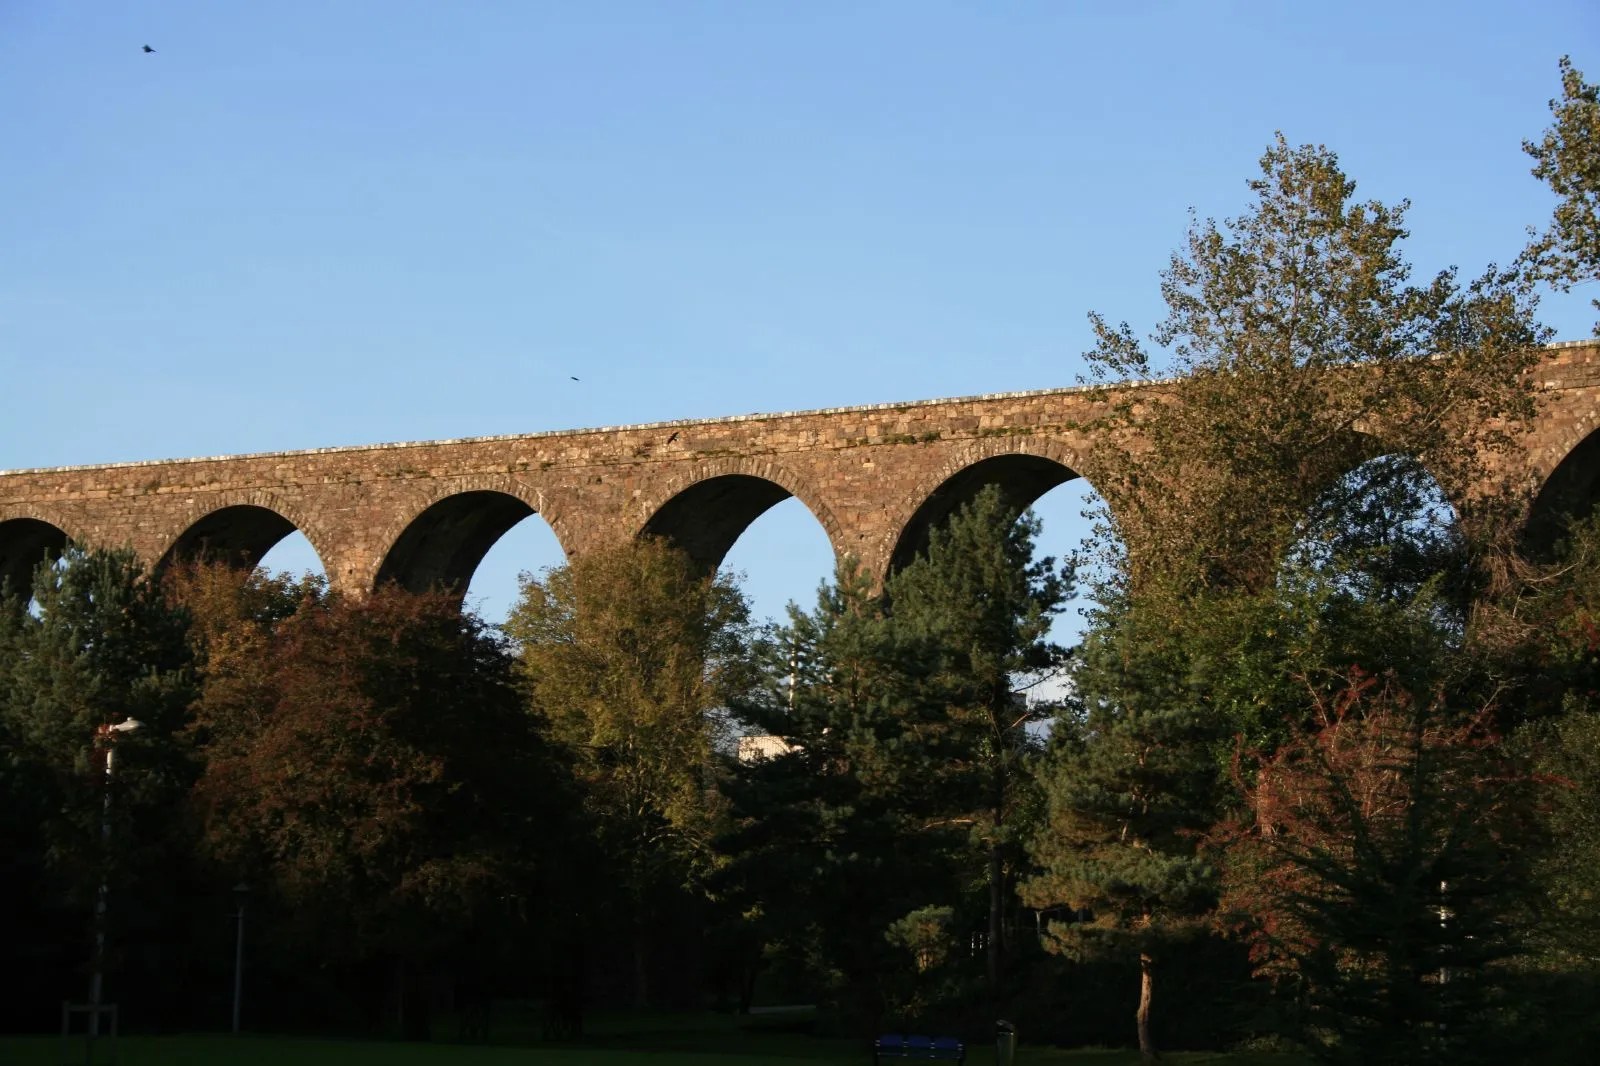 Photo showing: A view of the Railway Viaduct in Kilmacthomas, Co Waterford, Ireland.
(Nov 2007, Cannon EOS 400D, Lens Model: EF-S18-55mm f/3.5-5.6).